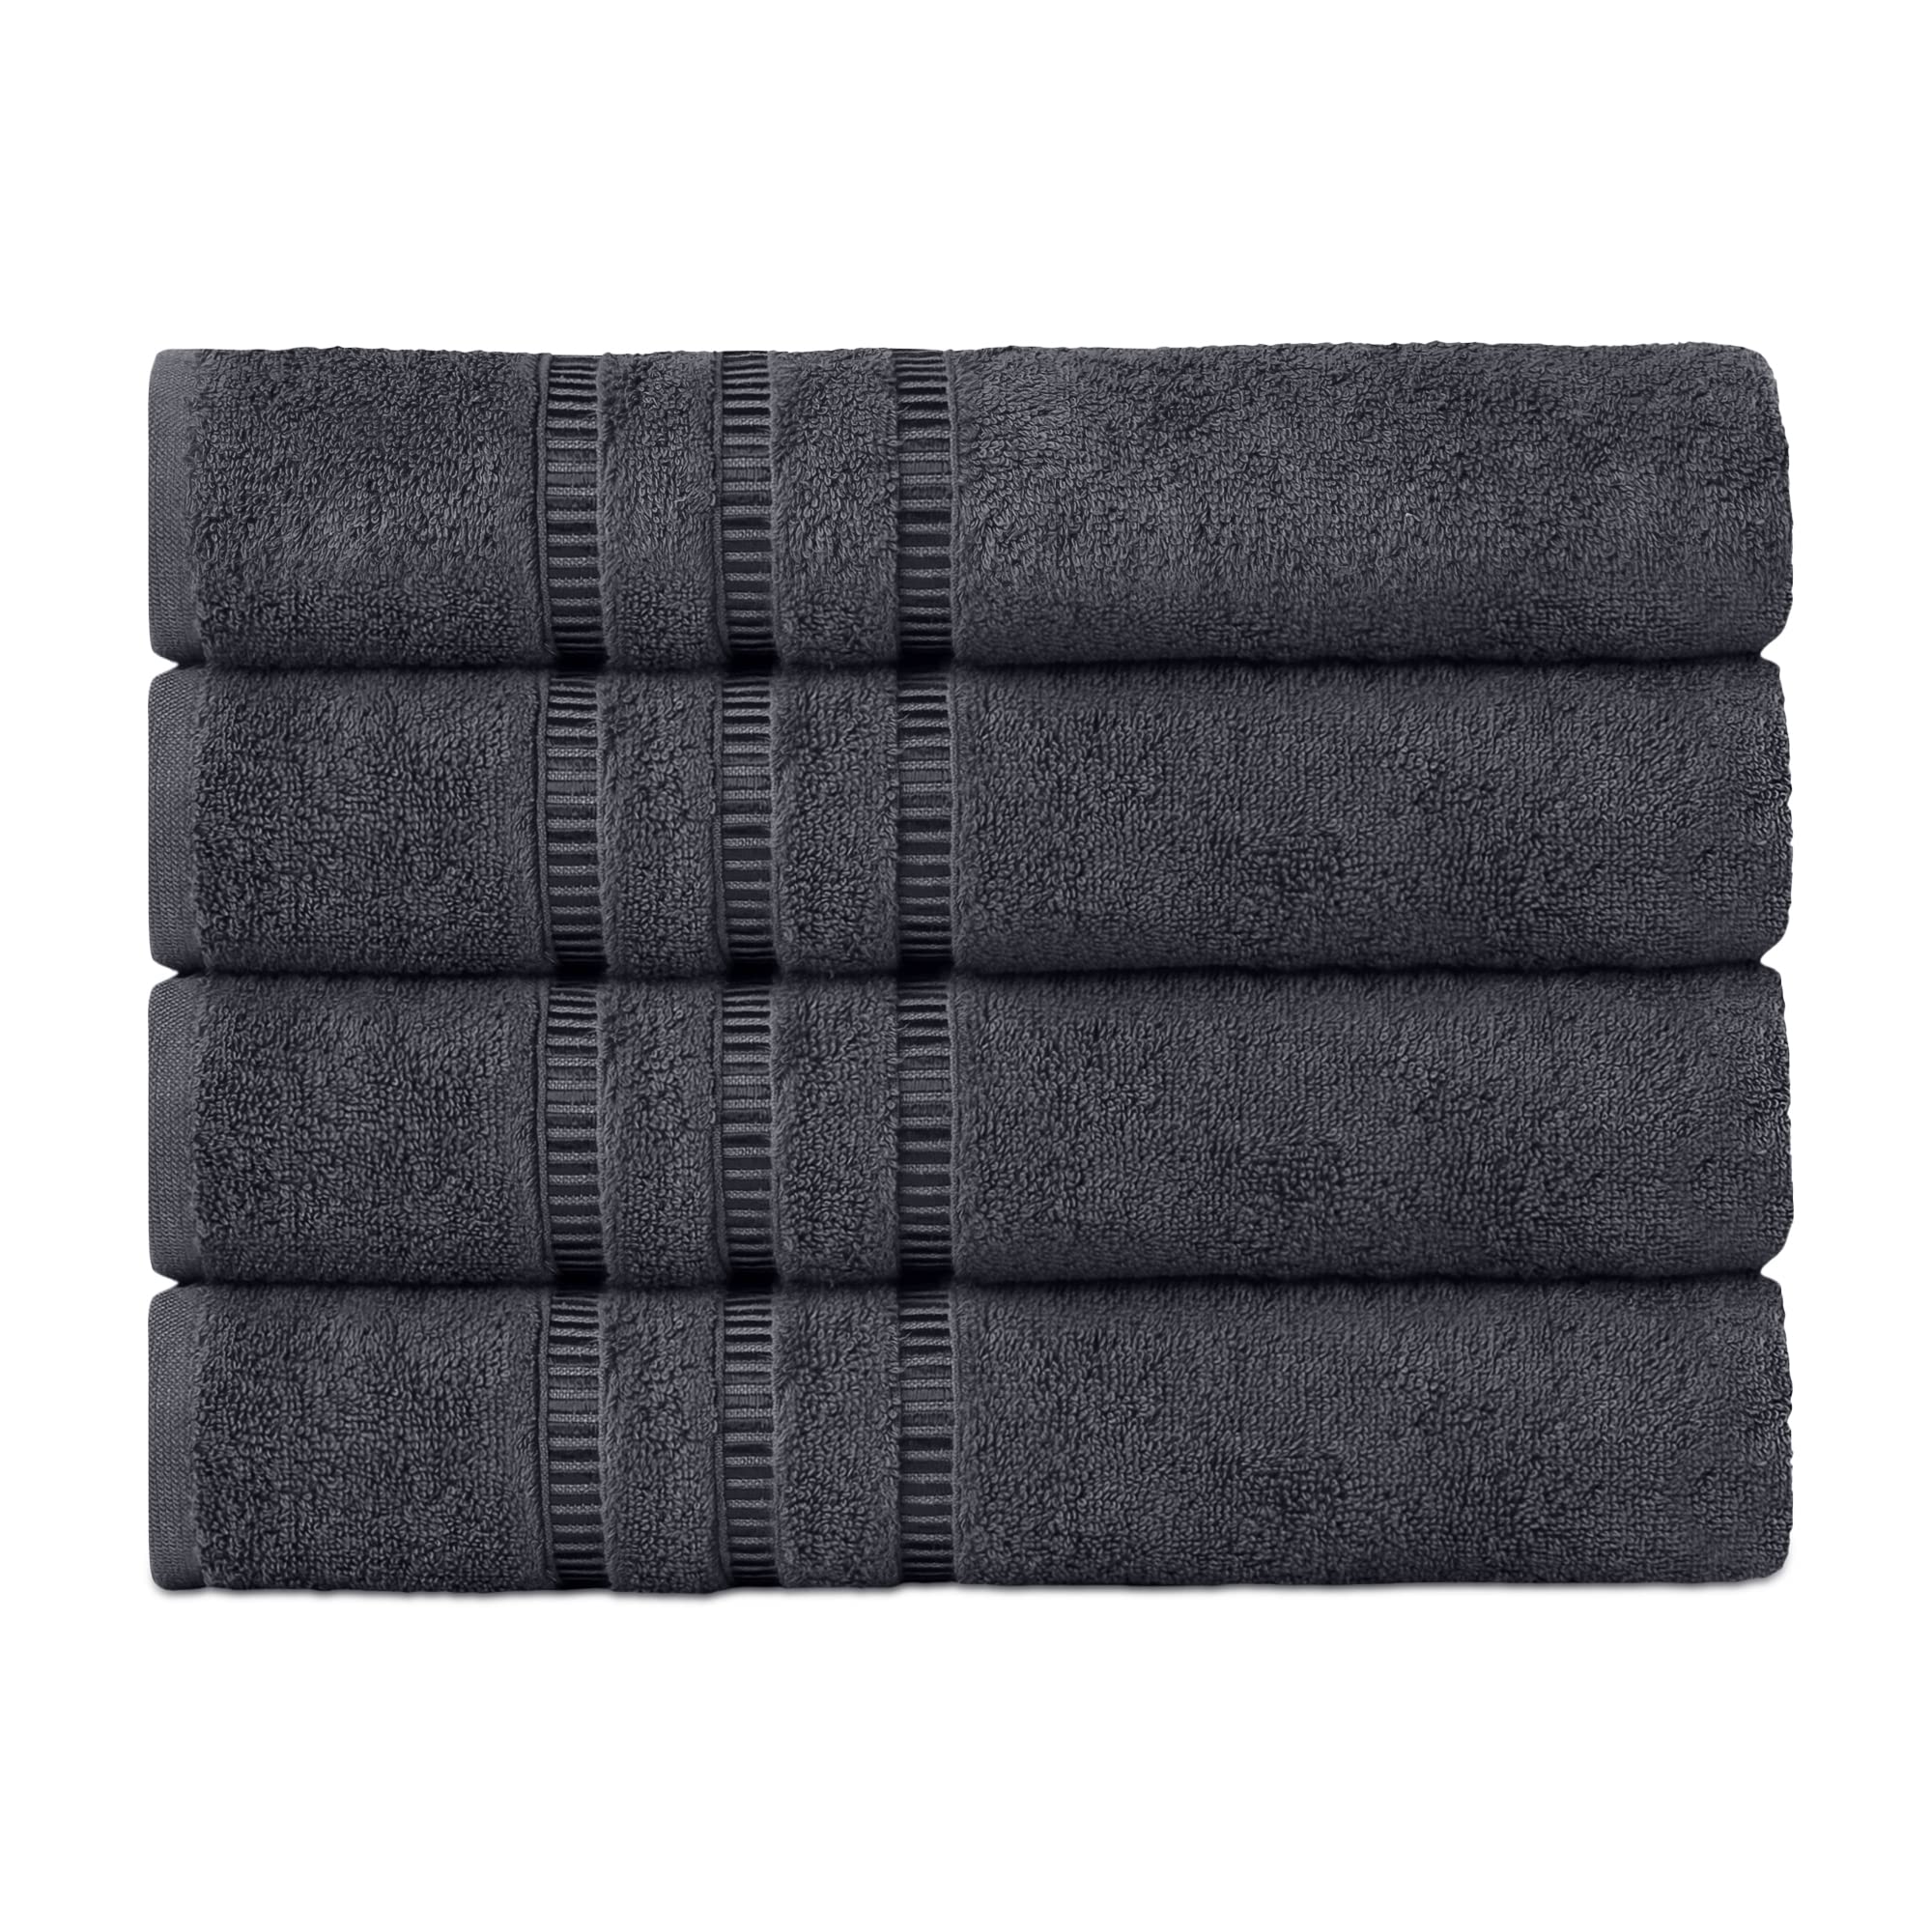 cOTTONIA Bath gray Towels for Bathroom clearance Prime Bulk grey Beach Towel for Birthday Men Dad 100% cotton Towels Set of 4 27